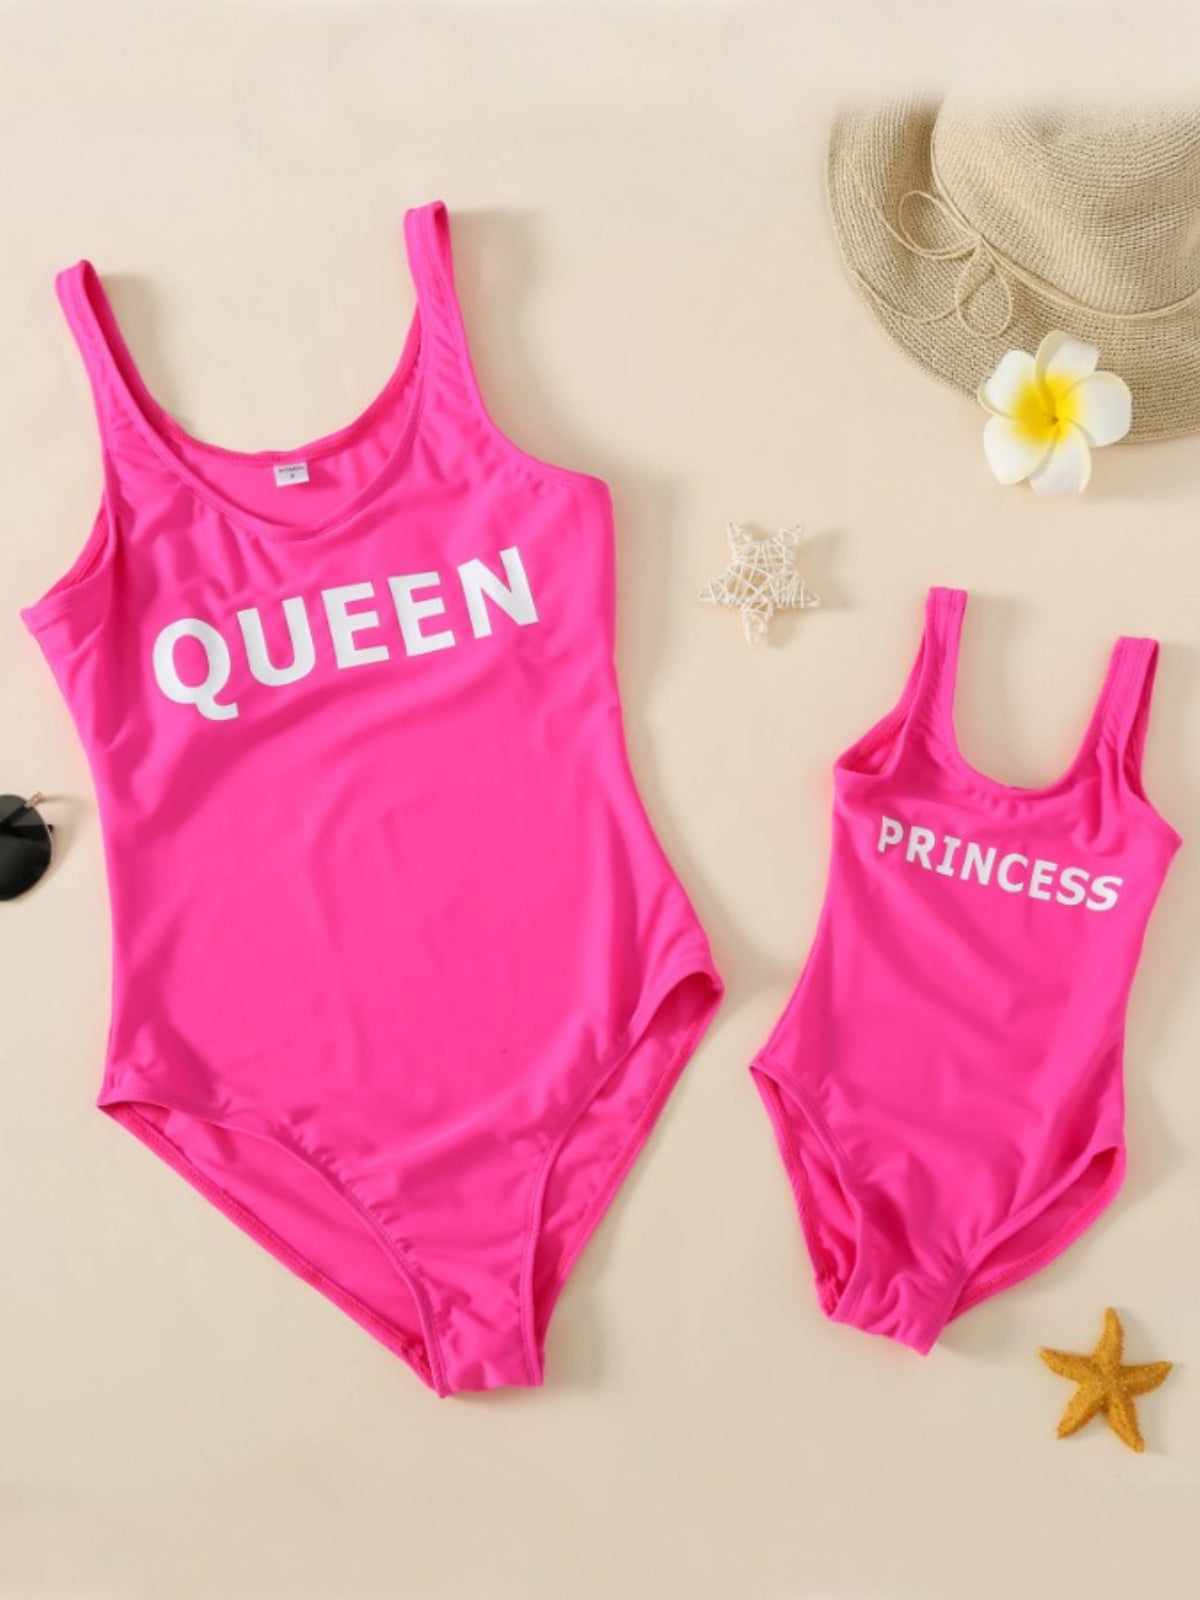 Family Swimsuits | Royalty Text Swimsuits & Trunks | Mia Belle Girls